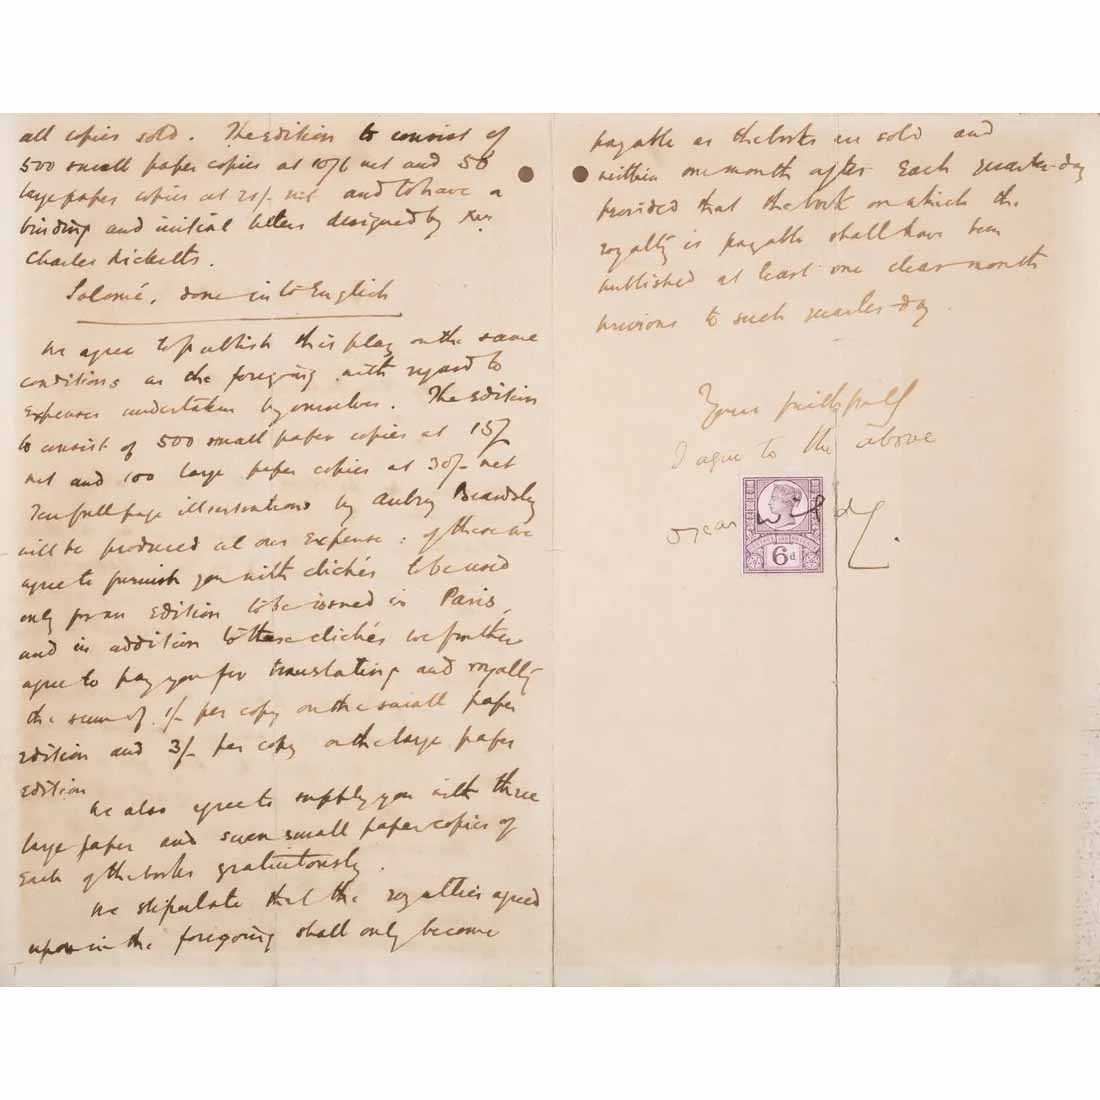 Oscar Wilde and Aubrey Beardsley signed contract letters lead Forum Auctions&#8217; May 30 sale